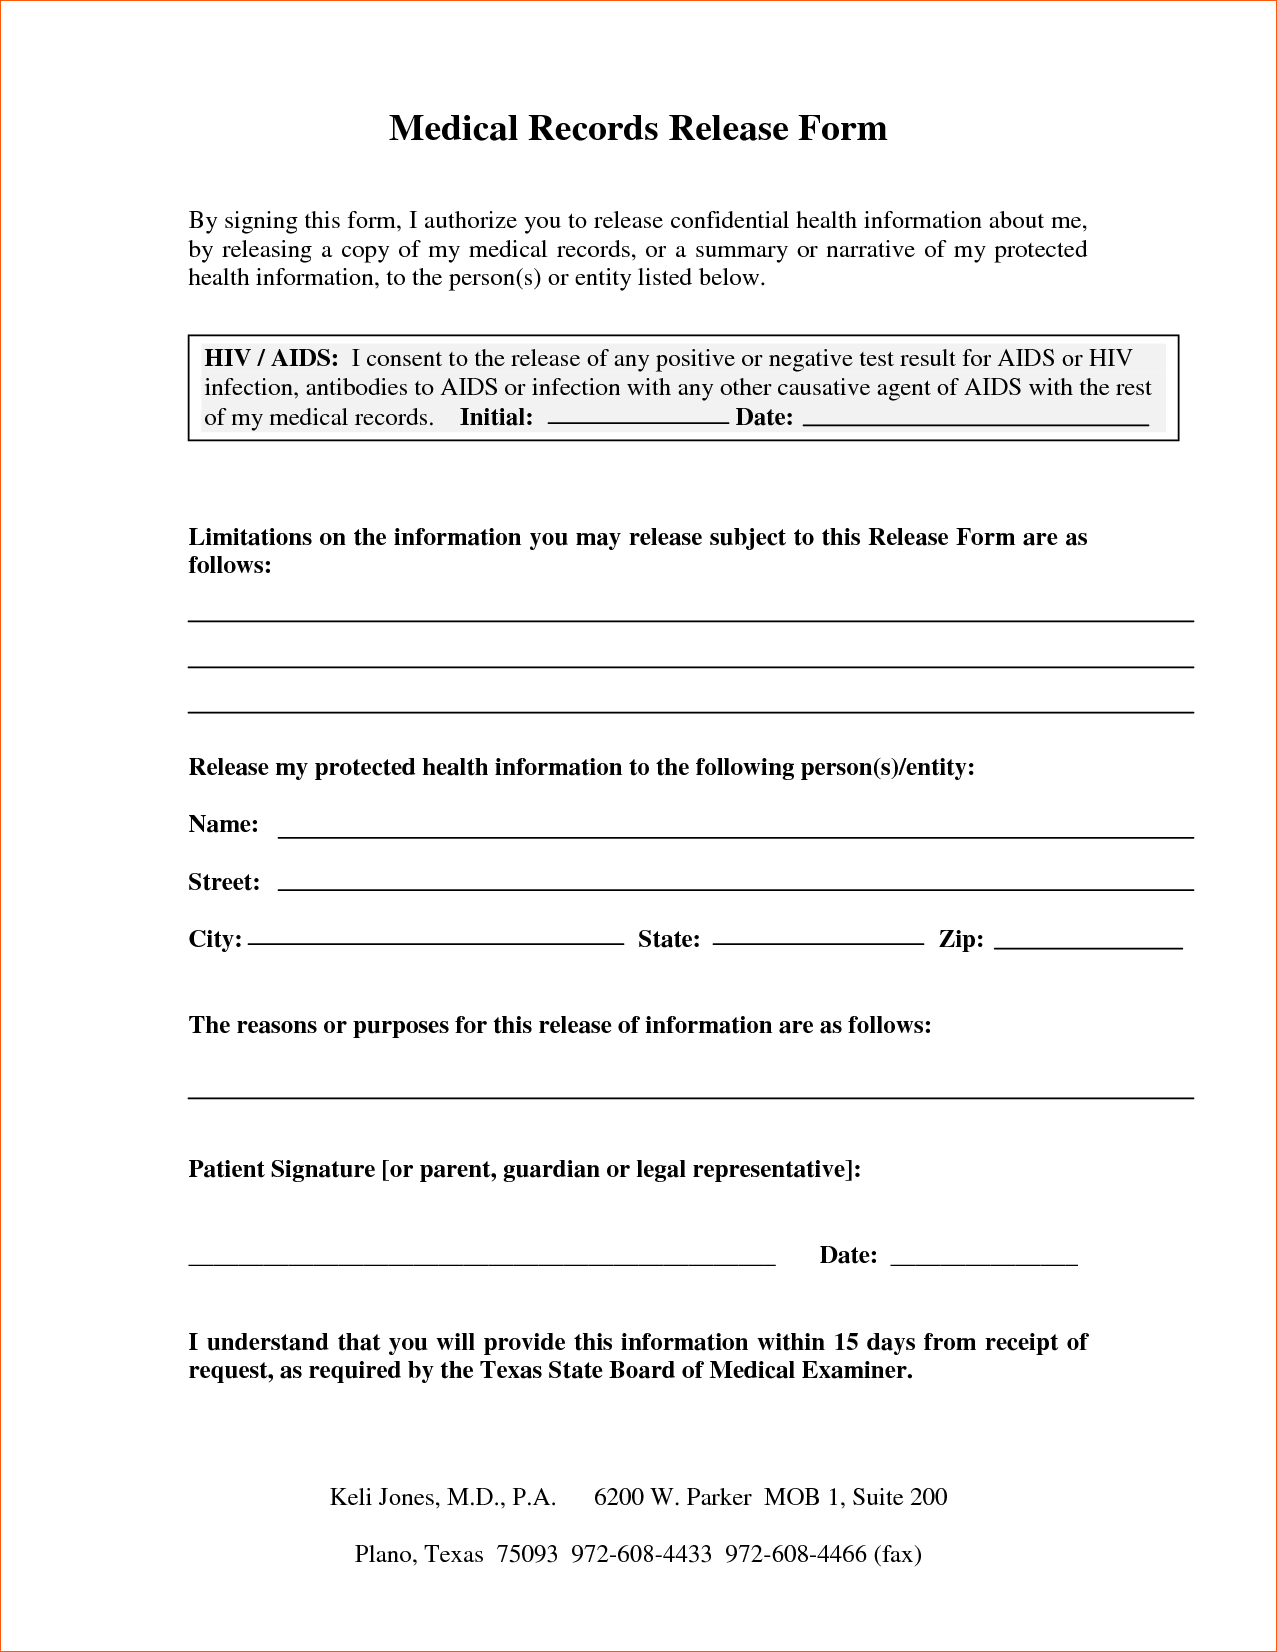 medical-records-release-form-templates-free-printable